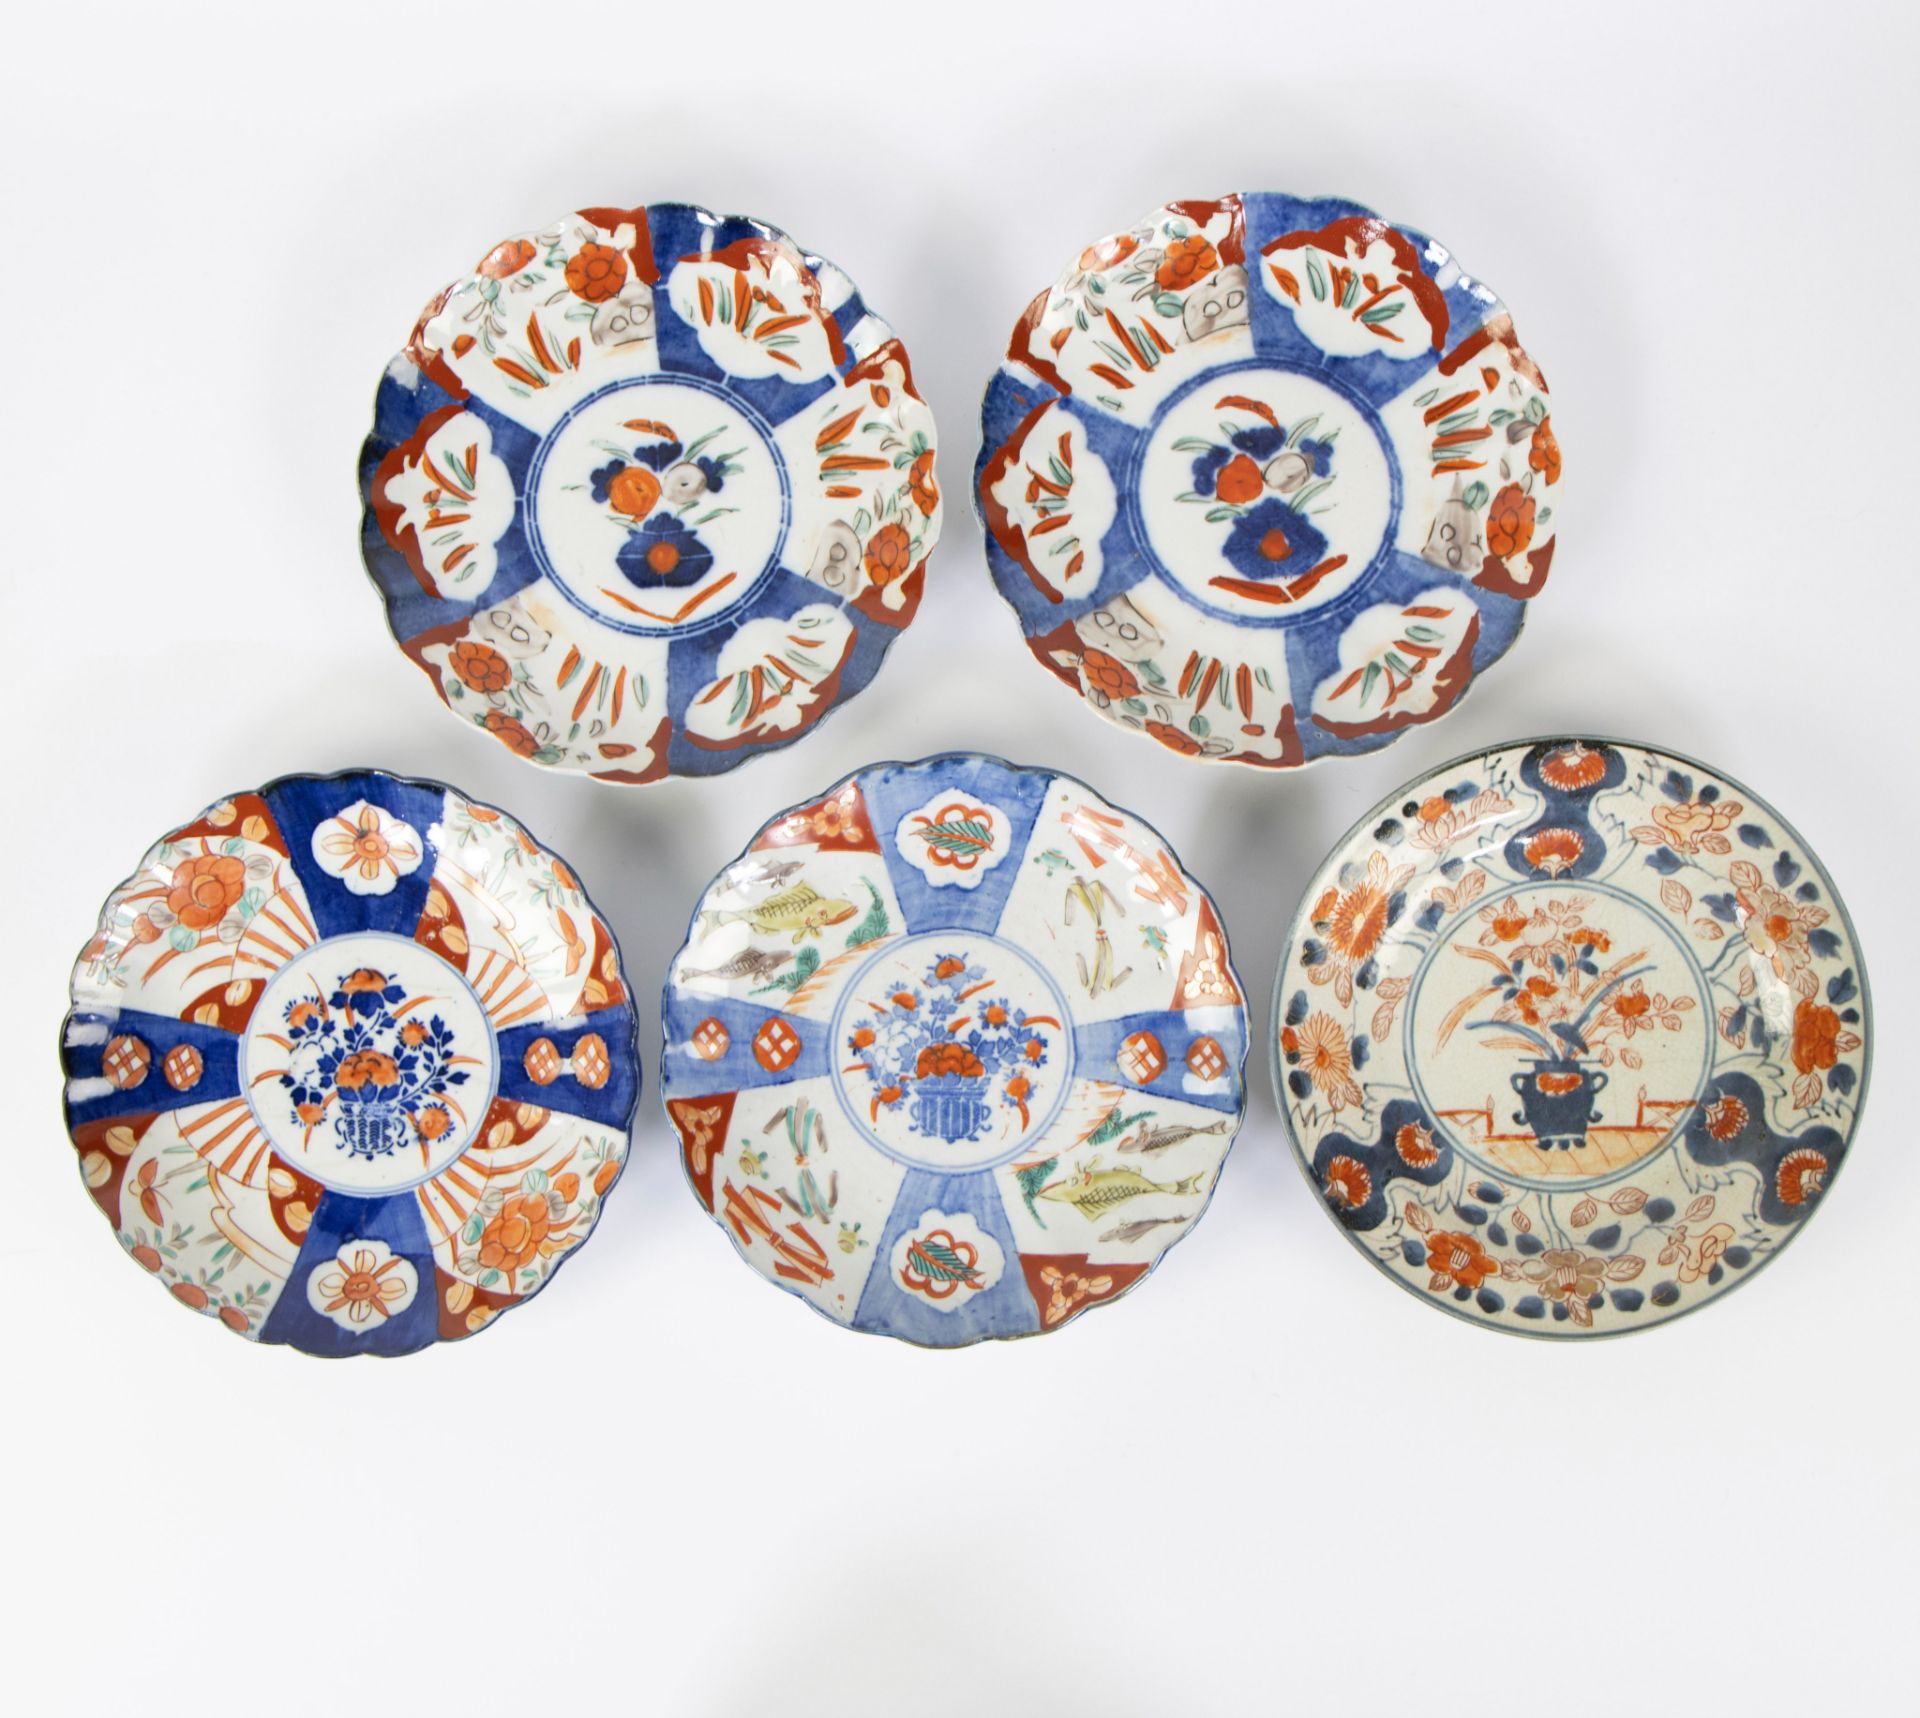 Lot Japanese and Chinese plates (11) blue/white and Imari - Image 6 of 7